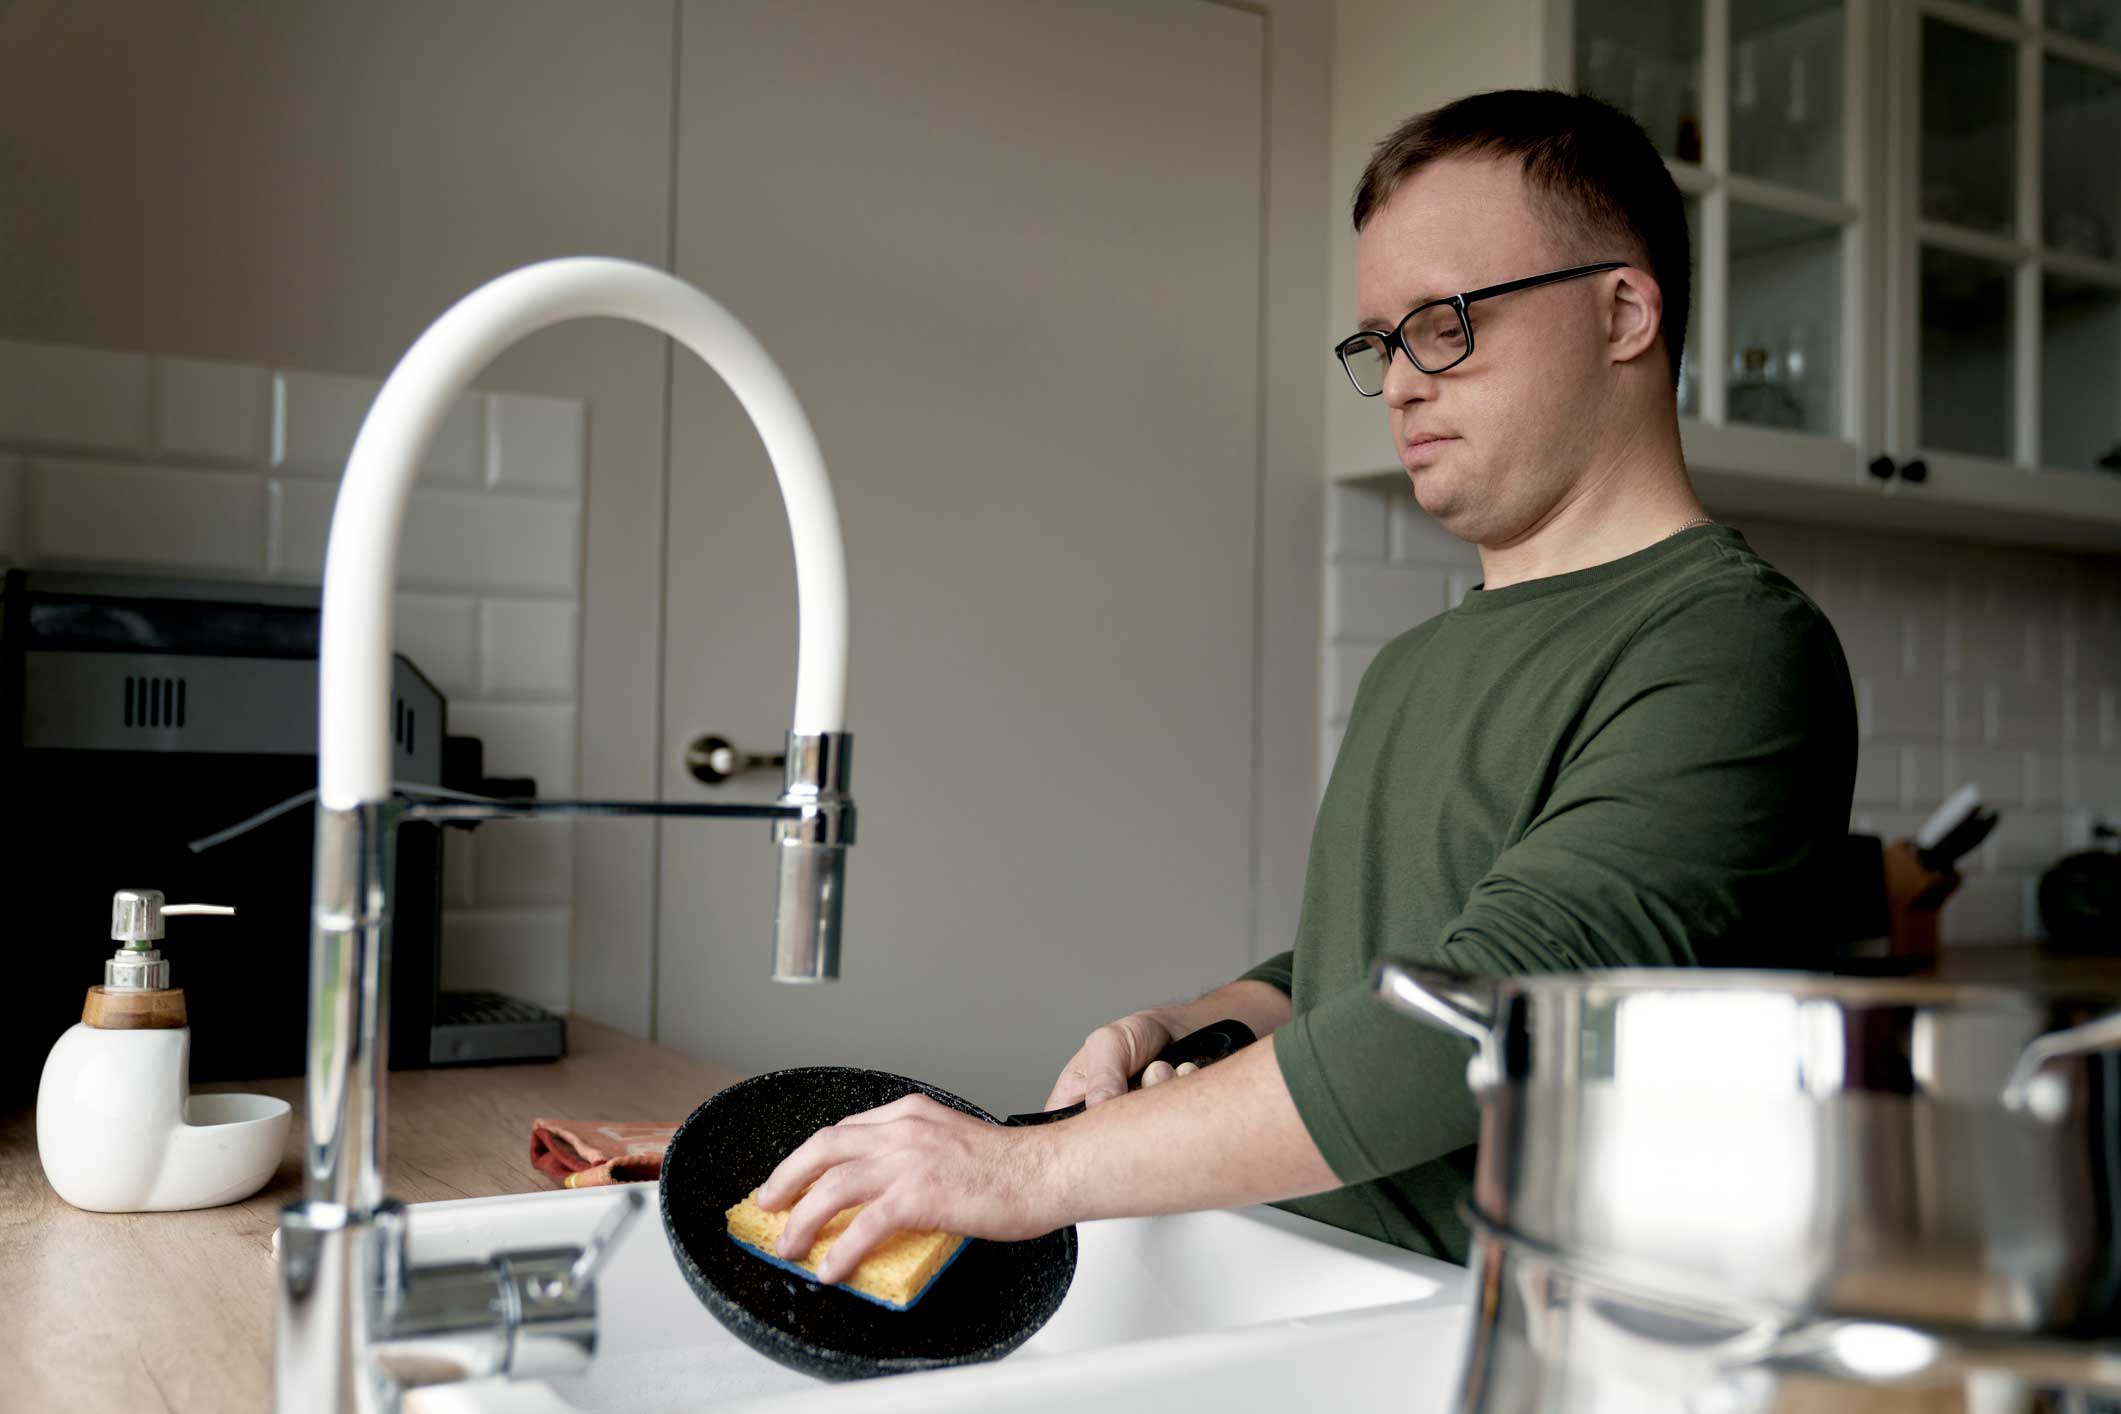 Man washing dishes with hot water in sink